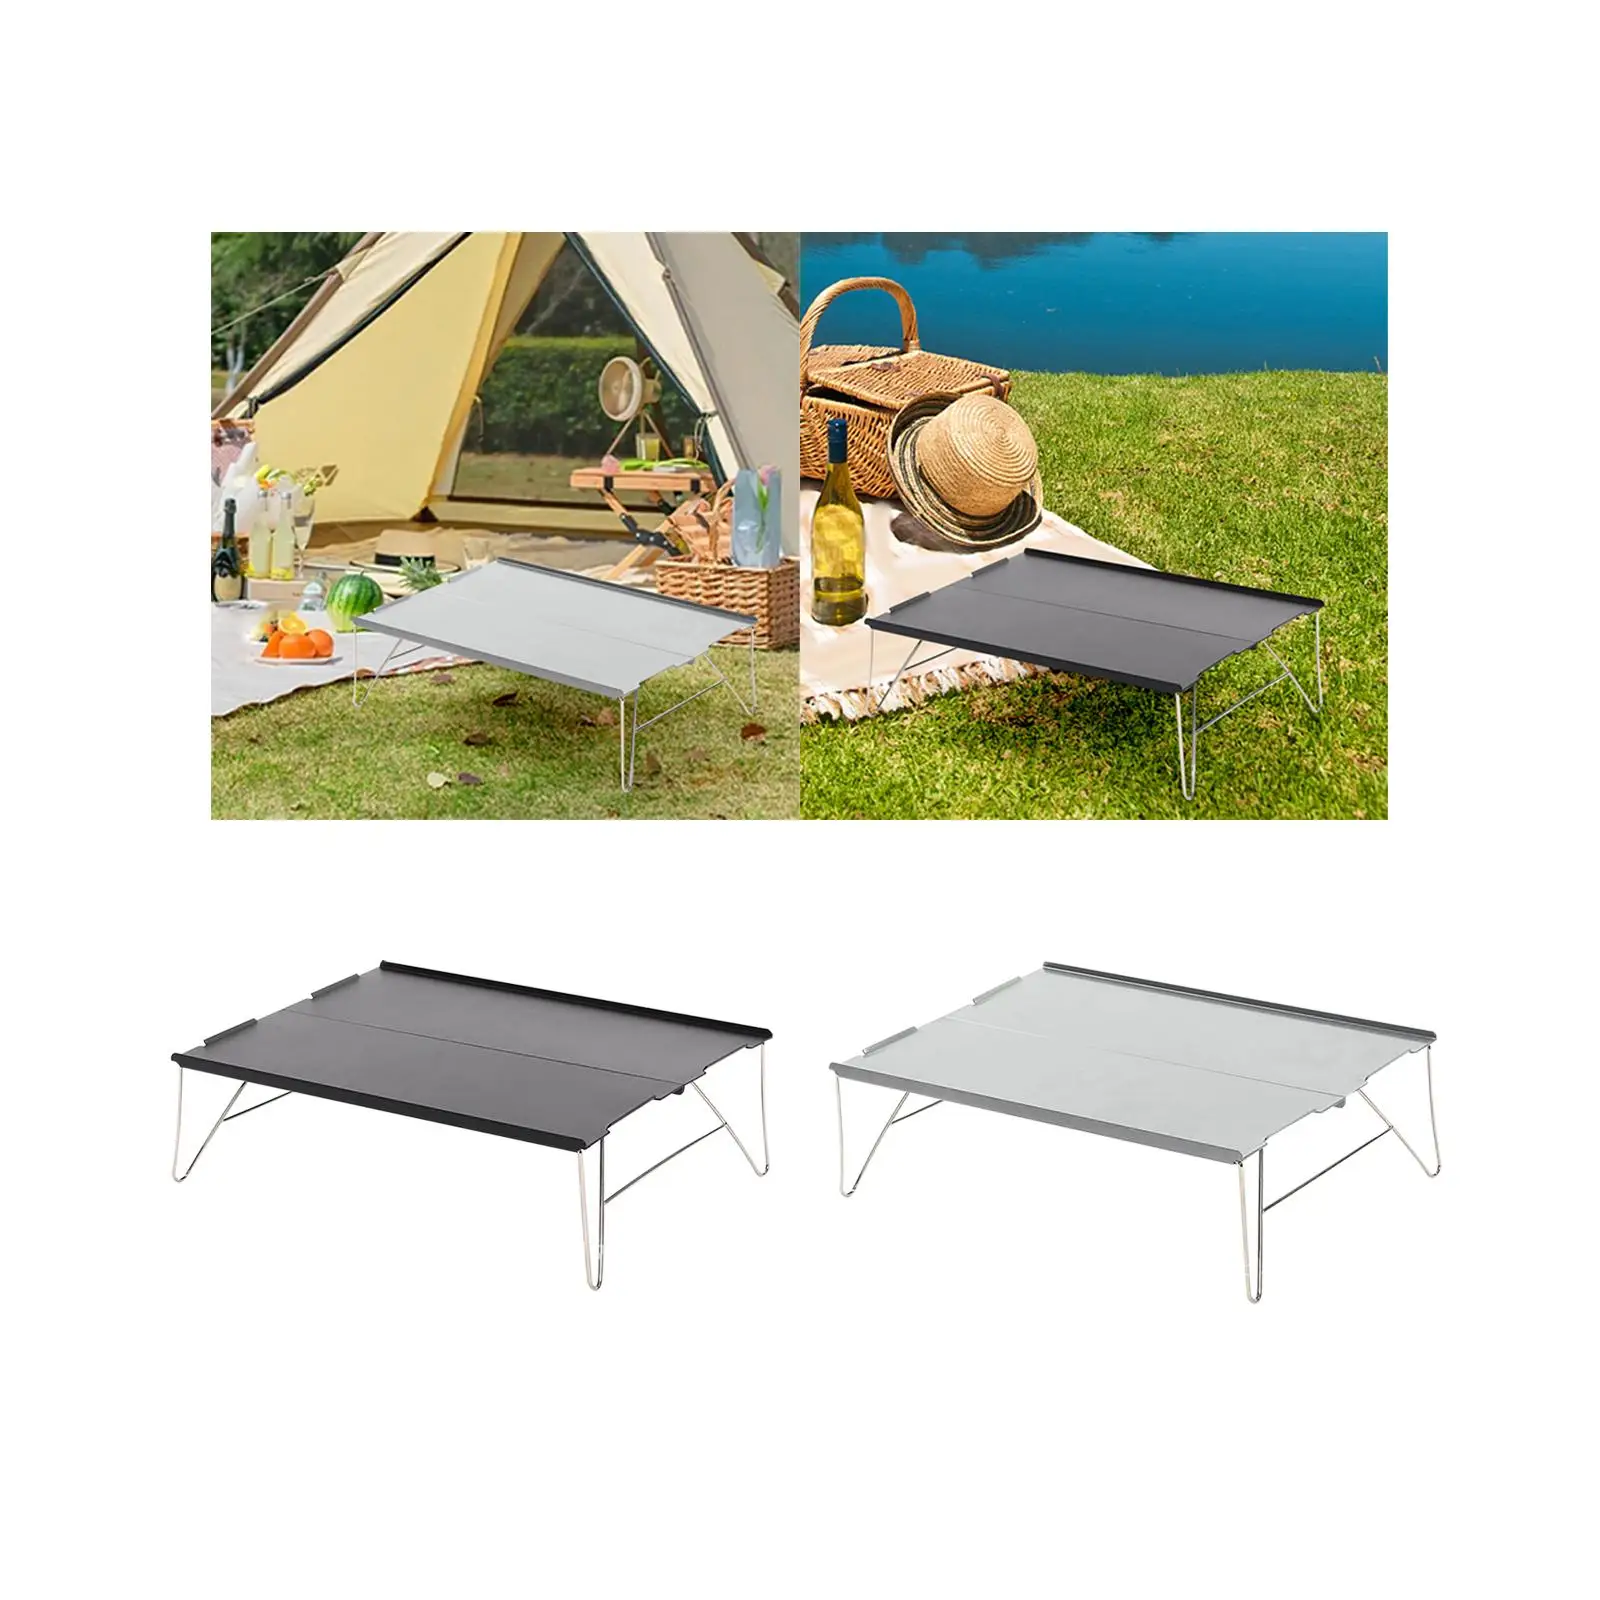 Camp Table Mini Table Computer Desk Working Reading Square Folding Desk Portable for Garden Travel Outdoor Picnic